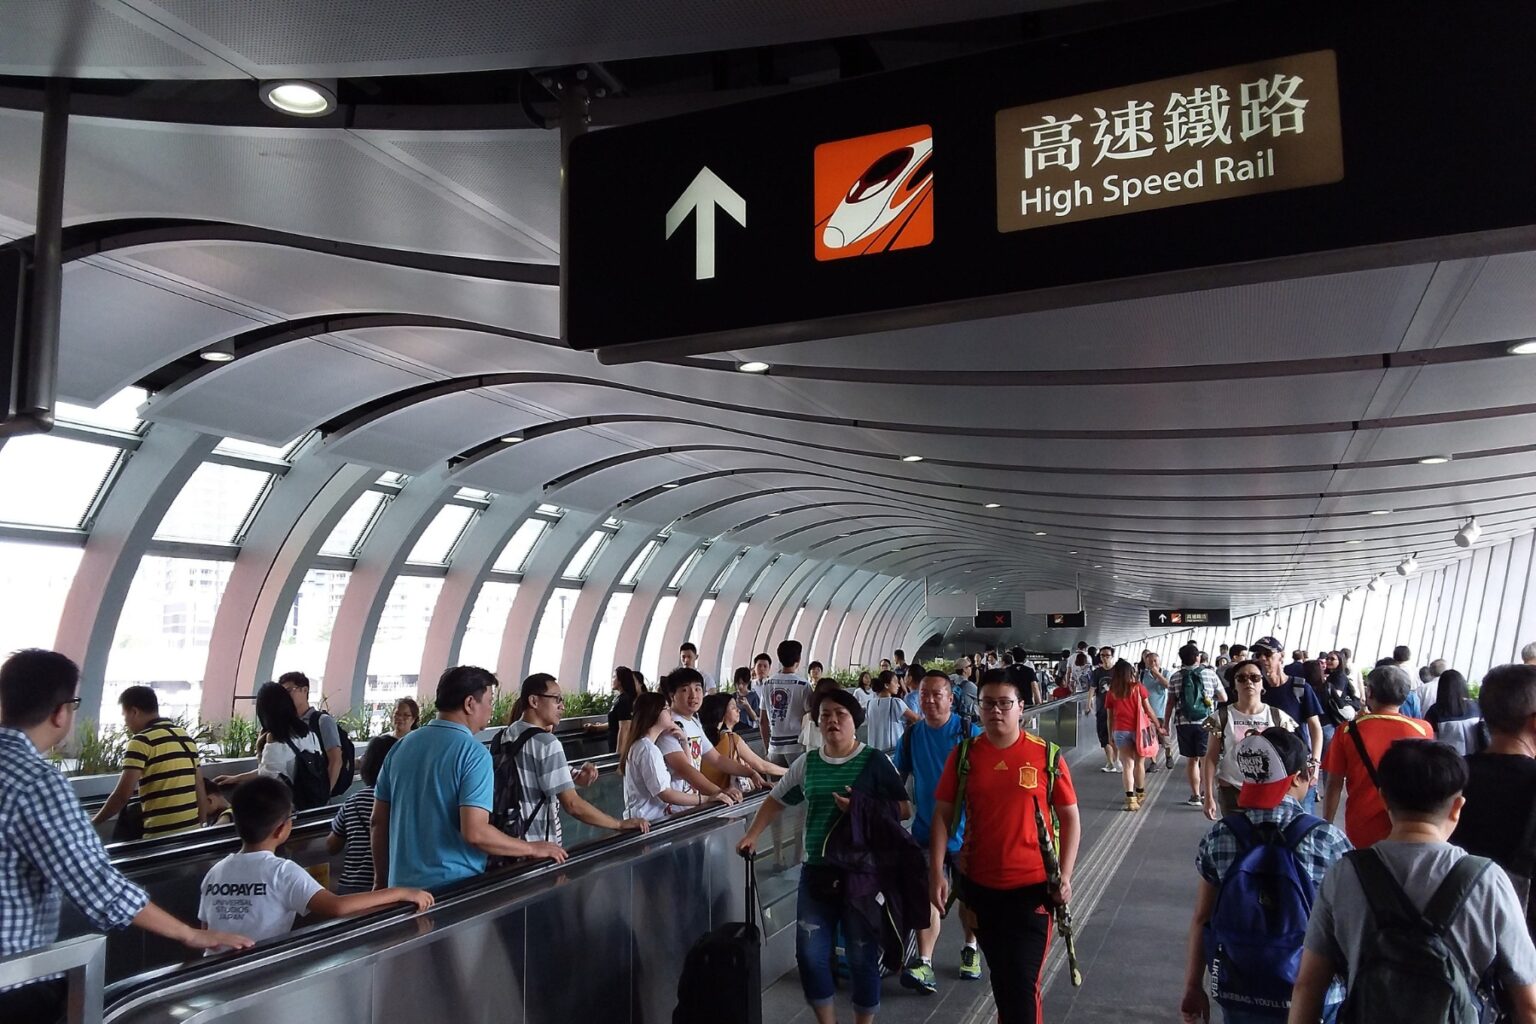 mtr introduces multi-ride tickets to china on high speed rail